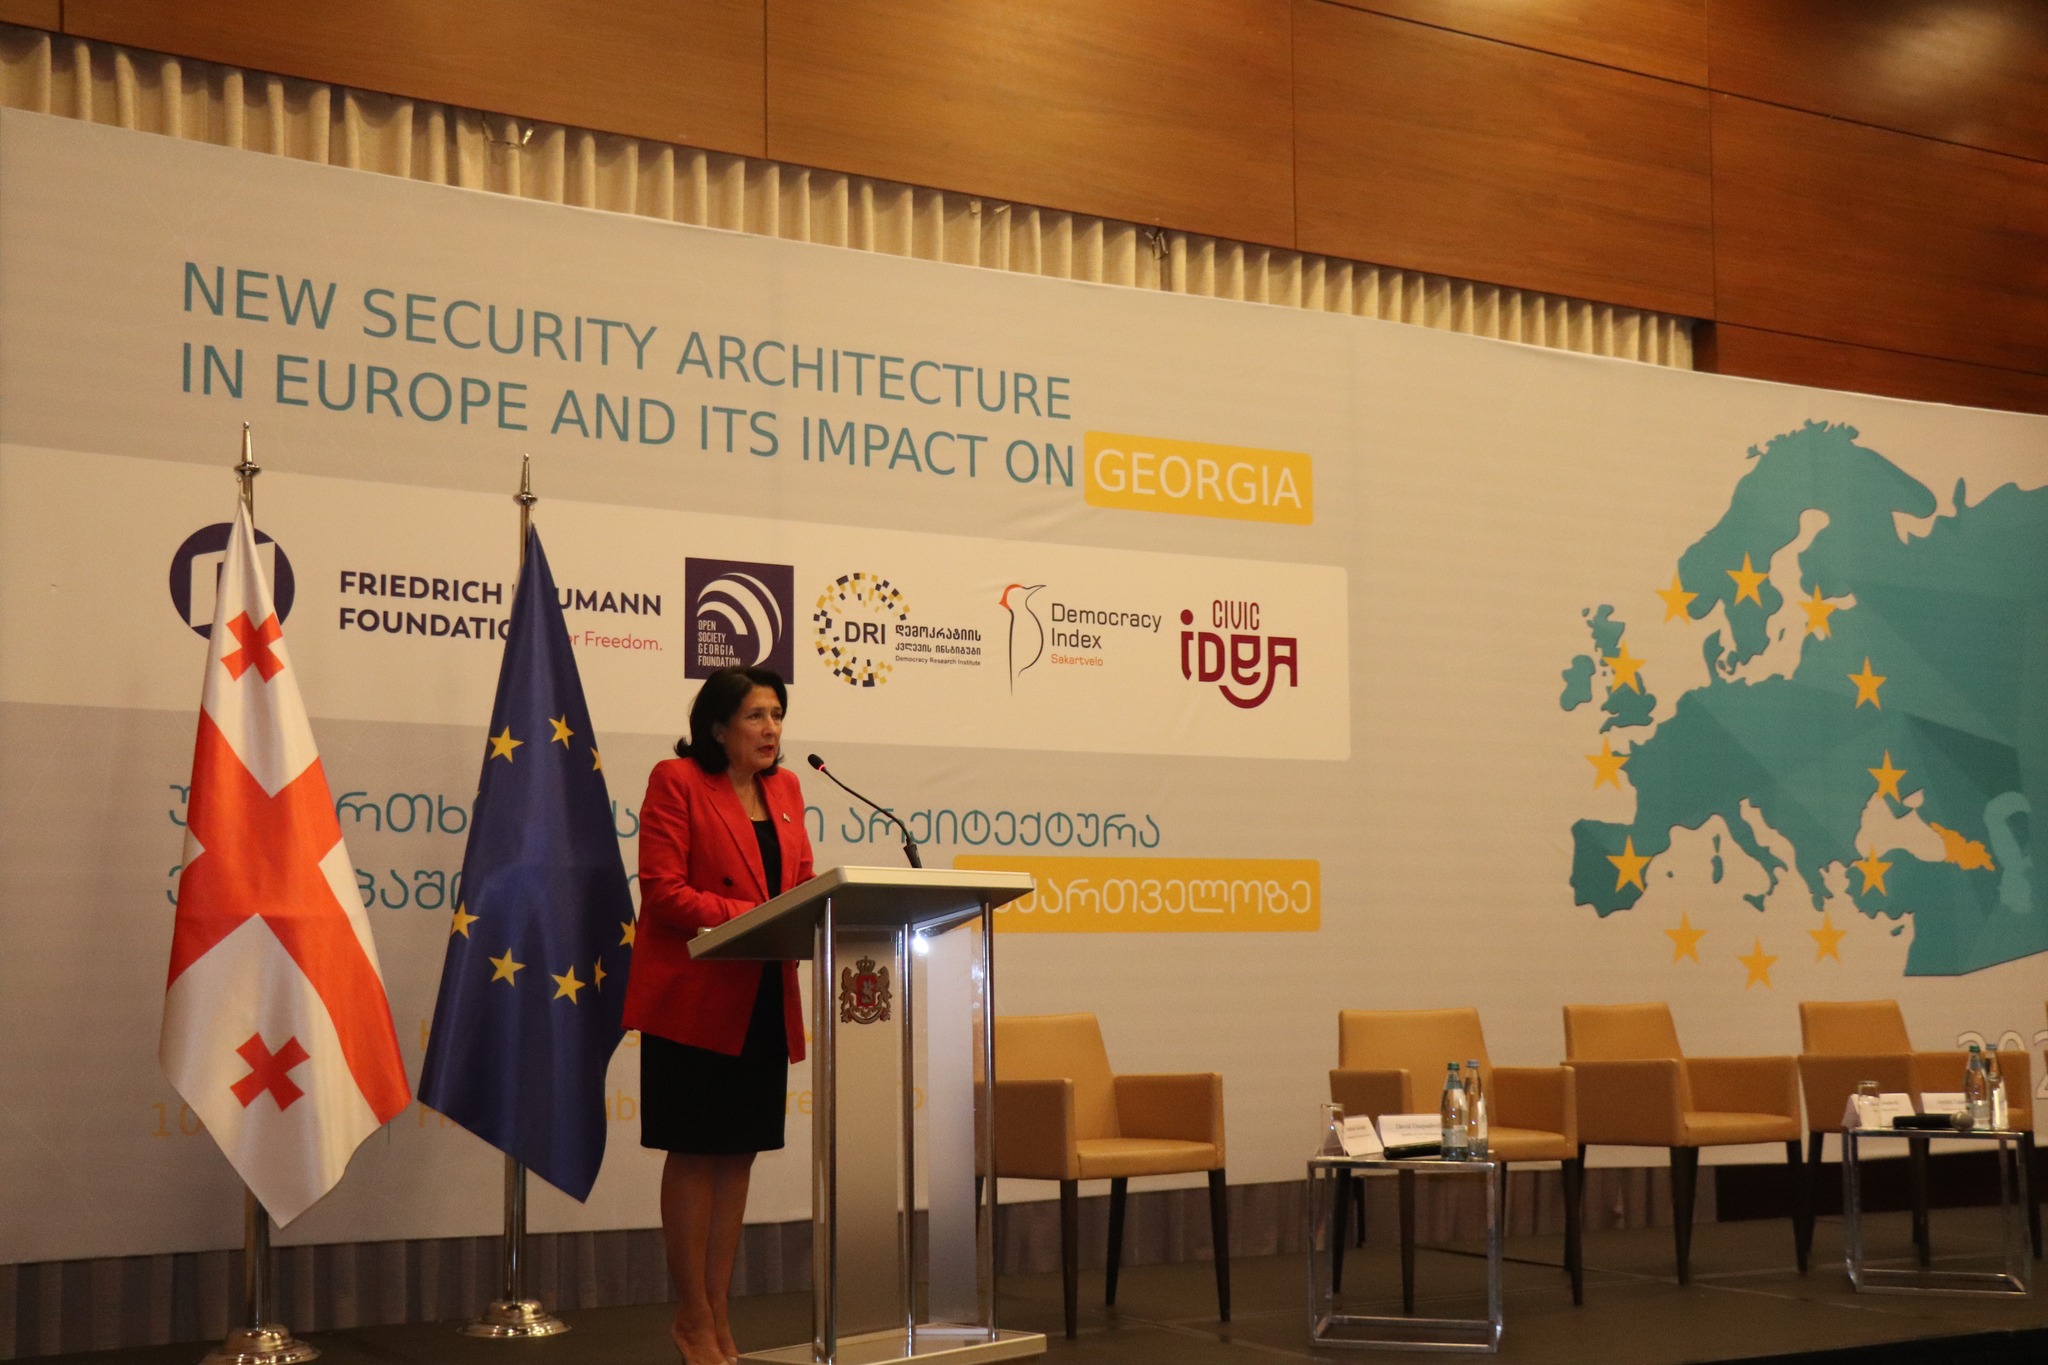 NEW SECURITY ARCHITECTURE IN EUROPE AND ITS IMPACT ON GEORGIA 2